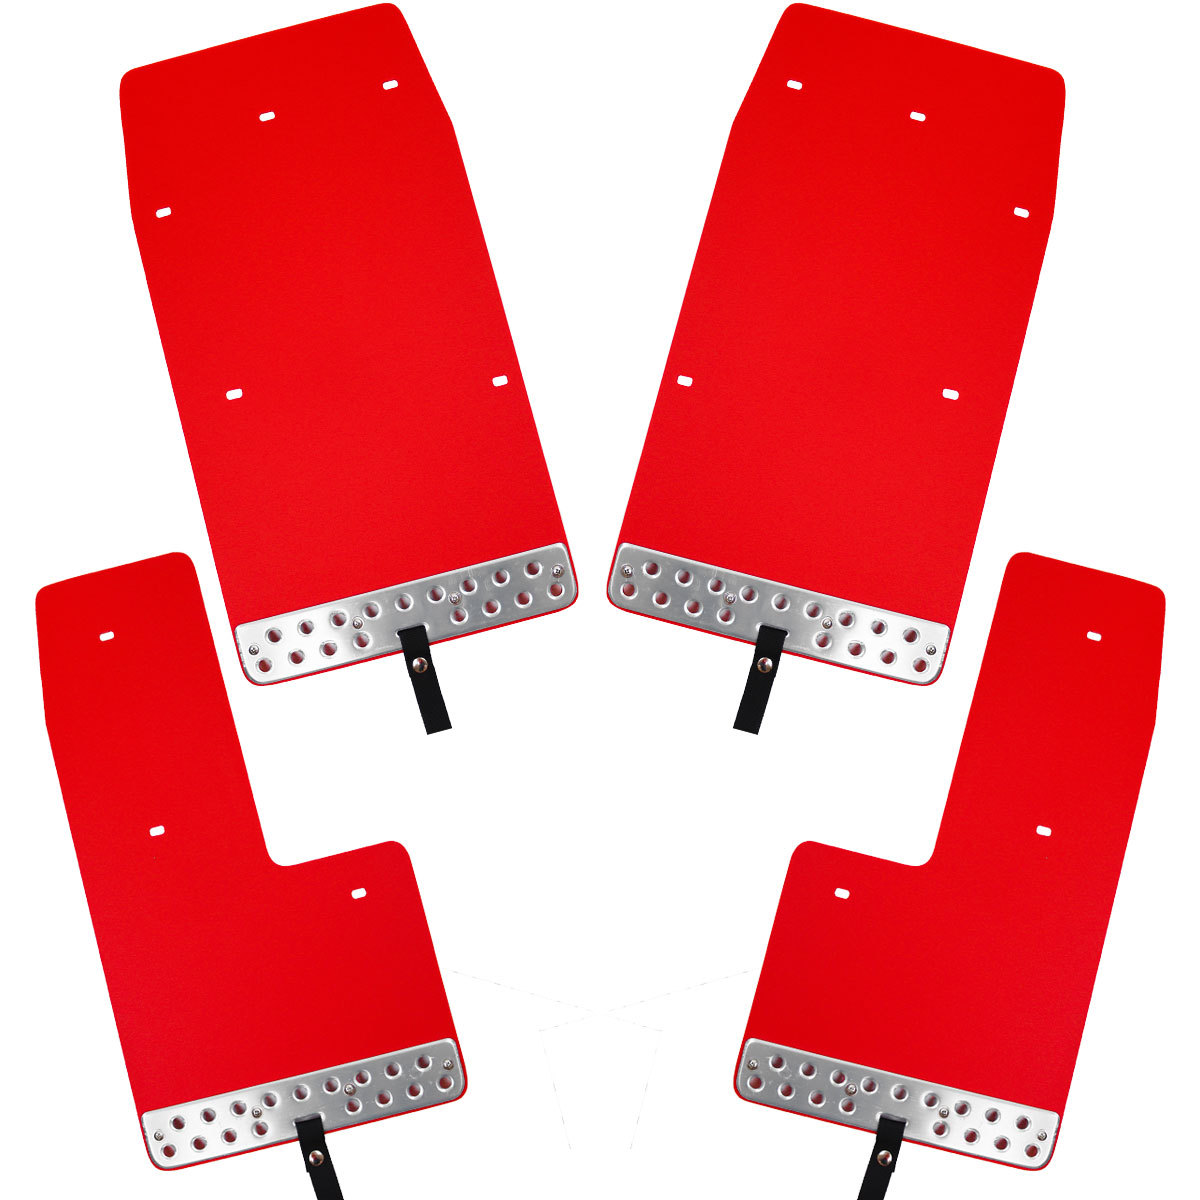  Hiace 200 series flap mudguard mud guard mudguard red for 1 vehicle off-road 2WD 4WD standard wide EVA